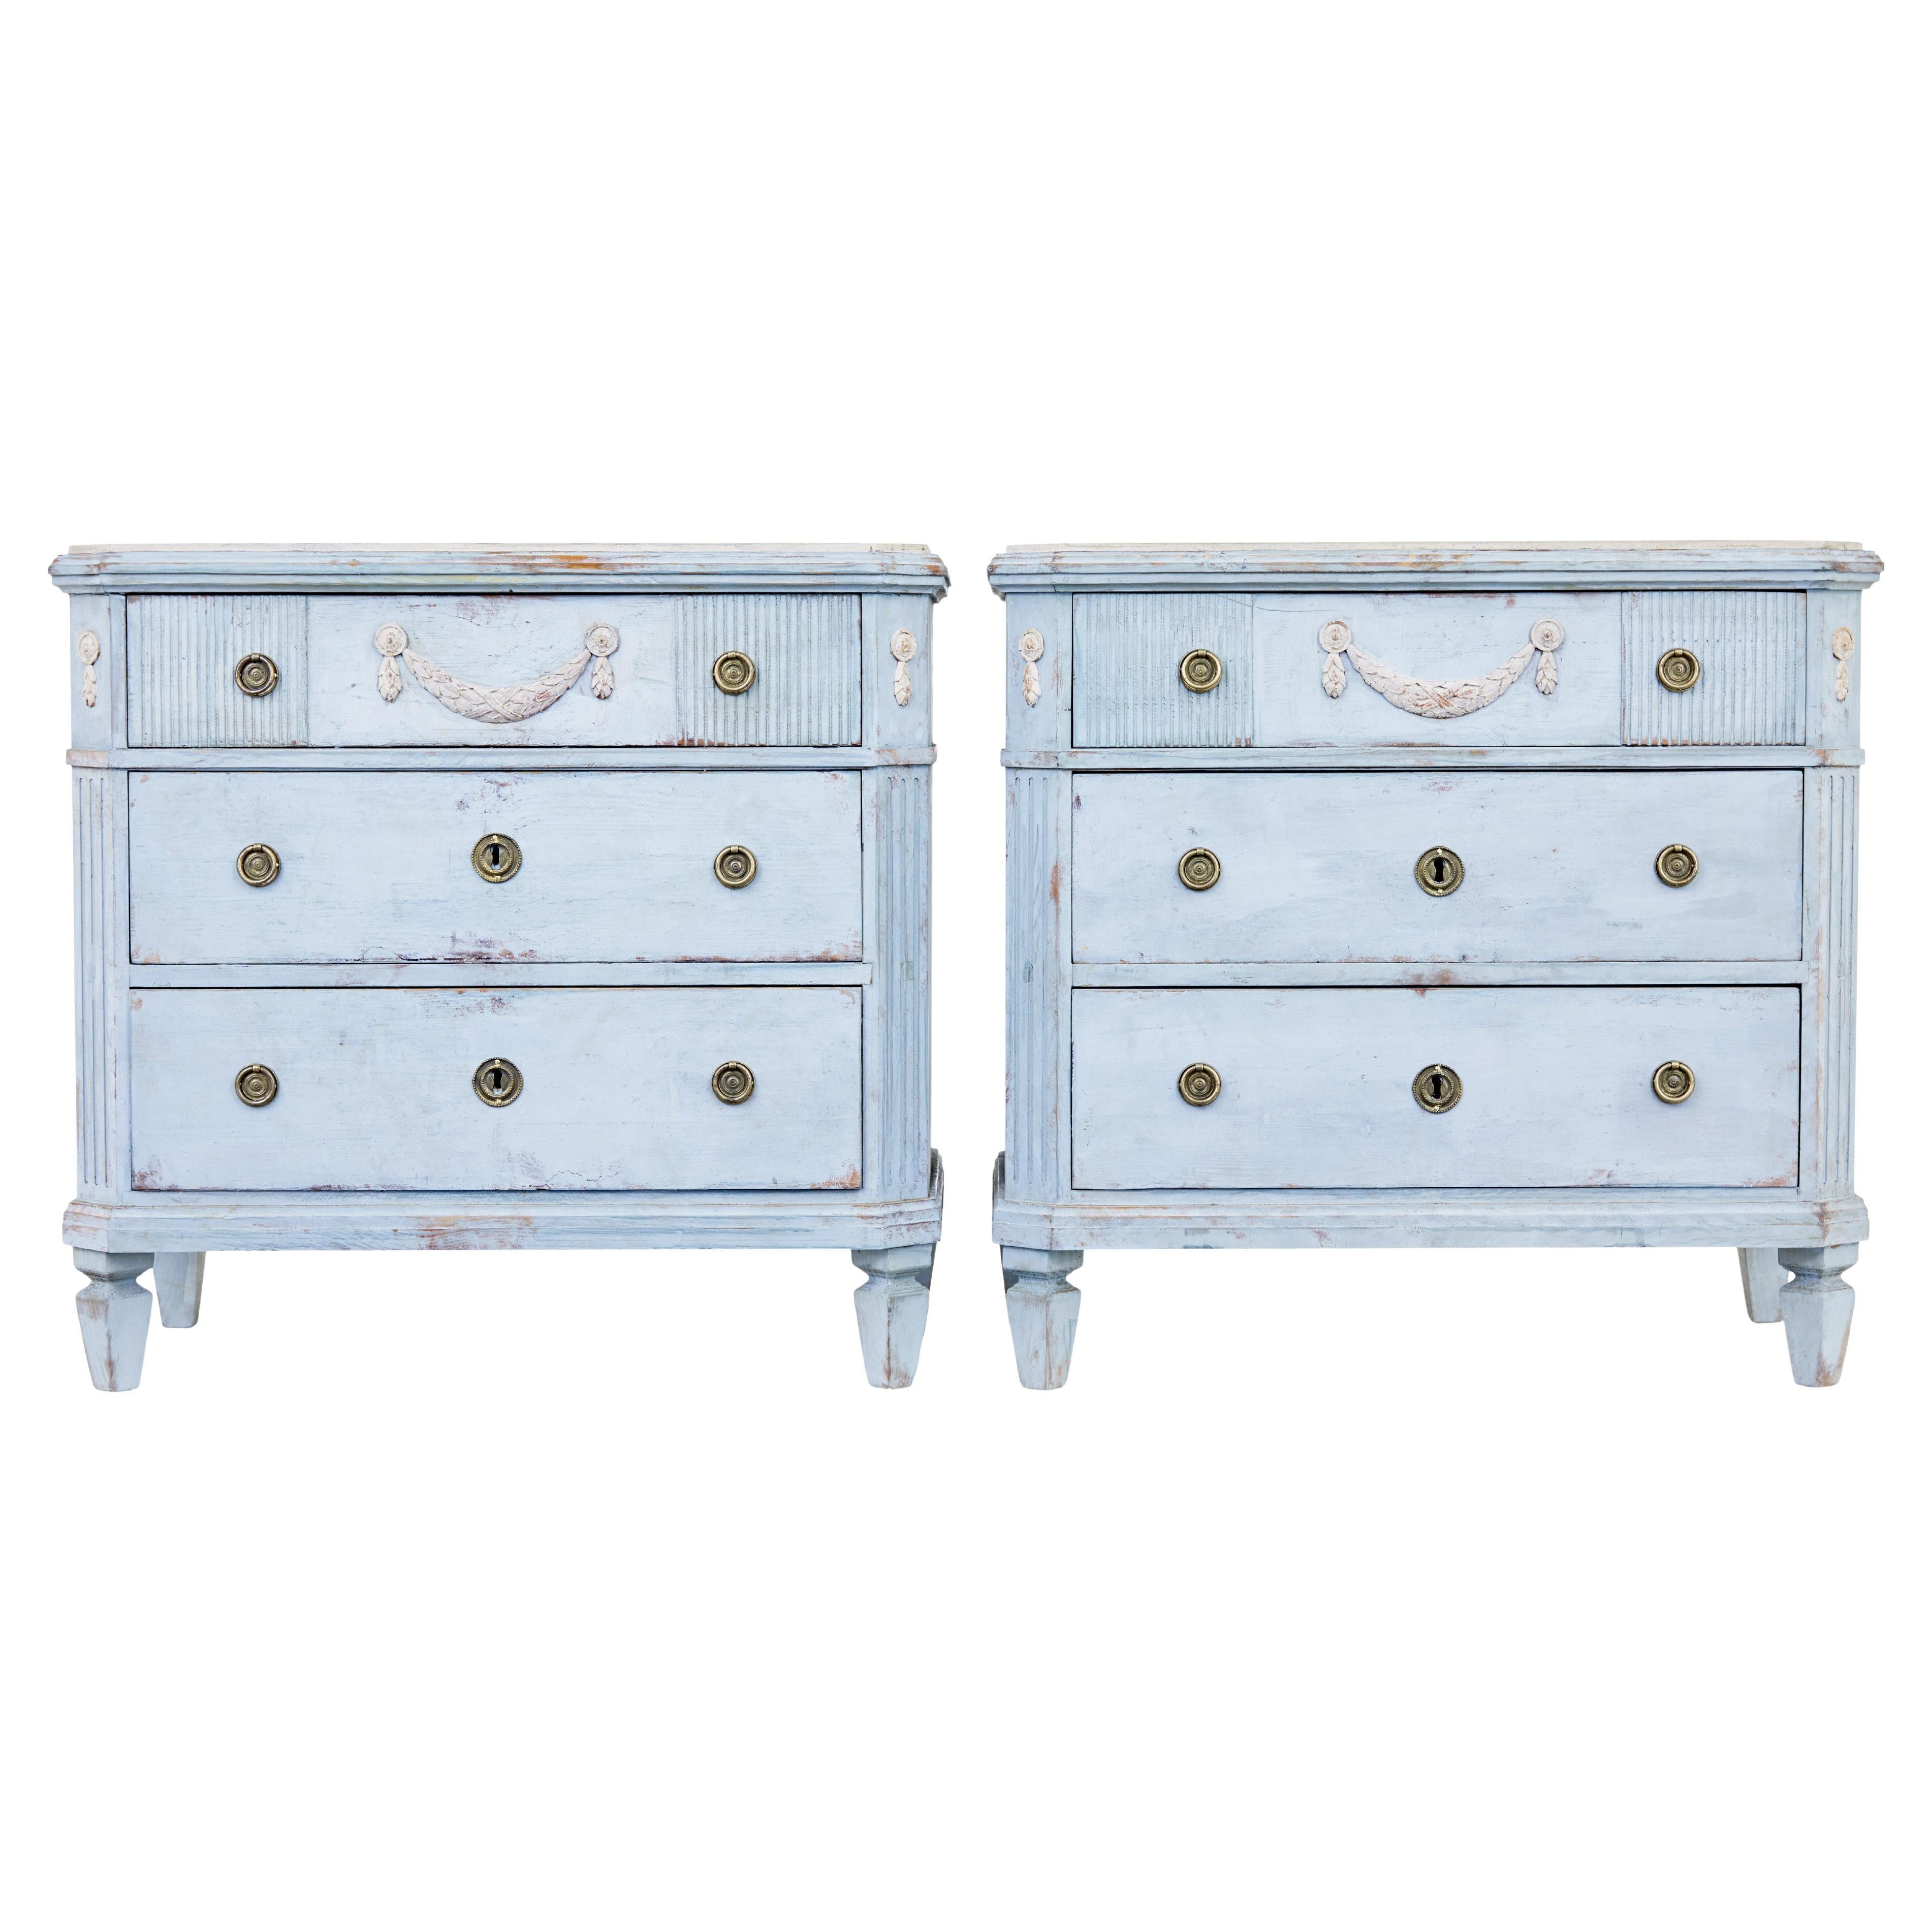 Pair of 19th century carved Swedish painted chest of drawers